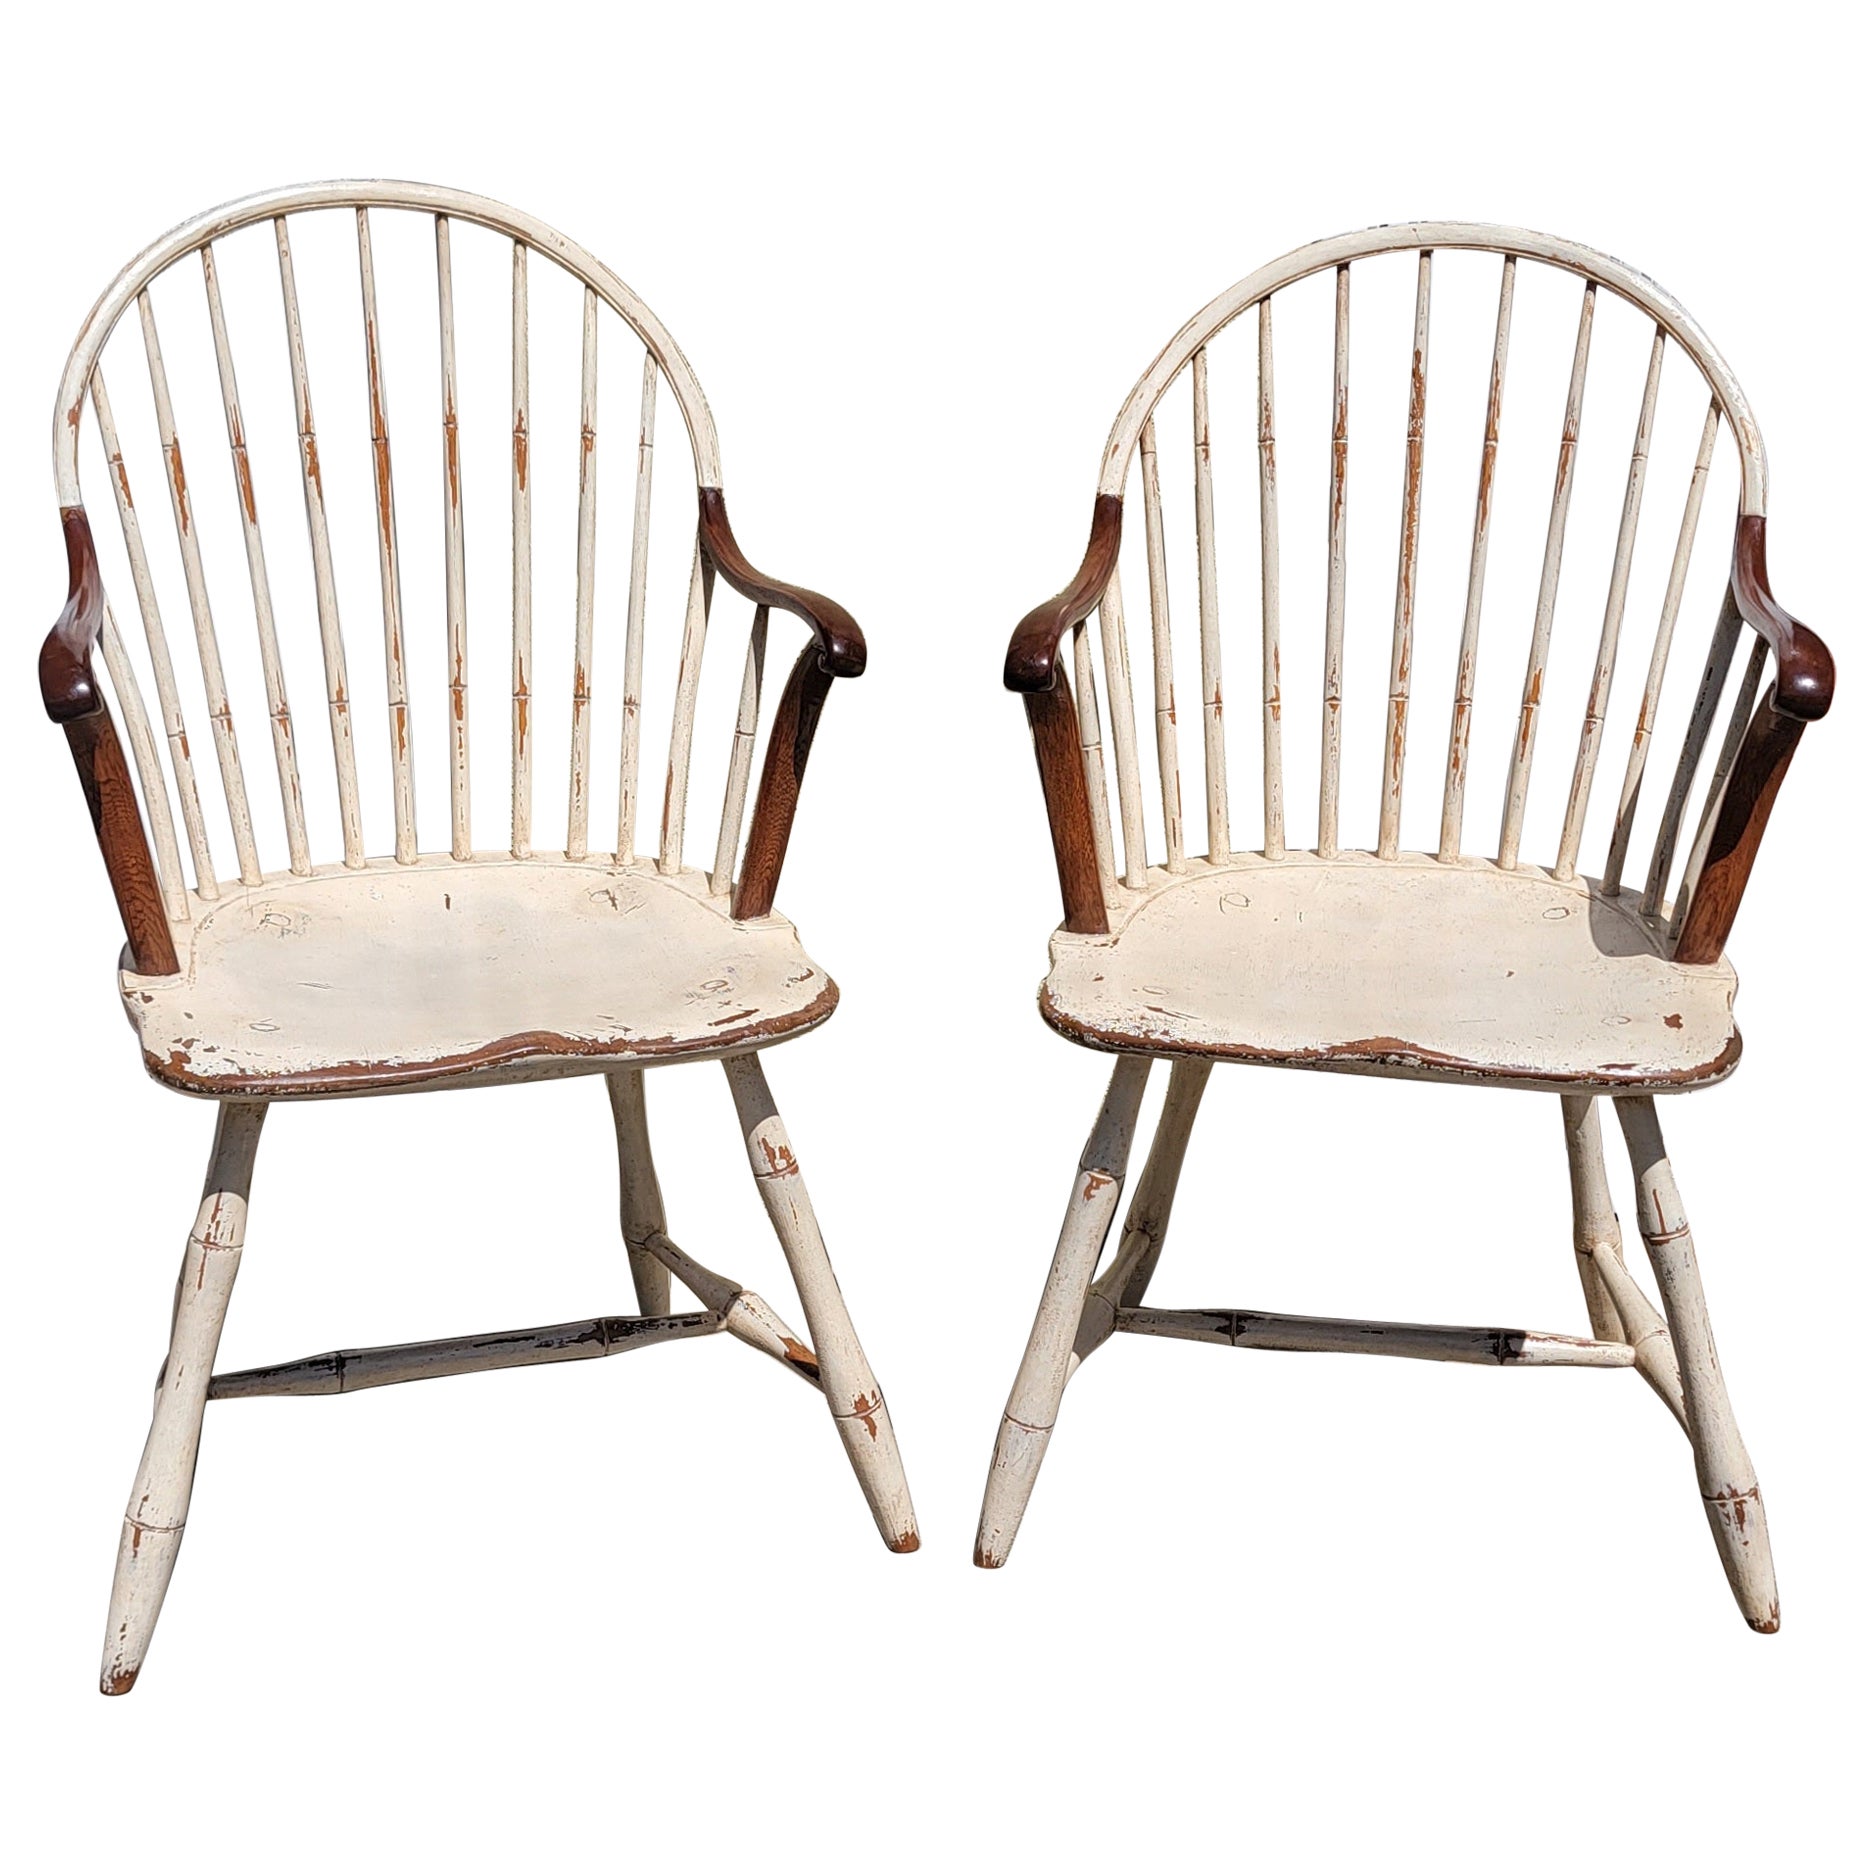 19th C Philadelphia Extended Arm Windsor Chairs, Pair